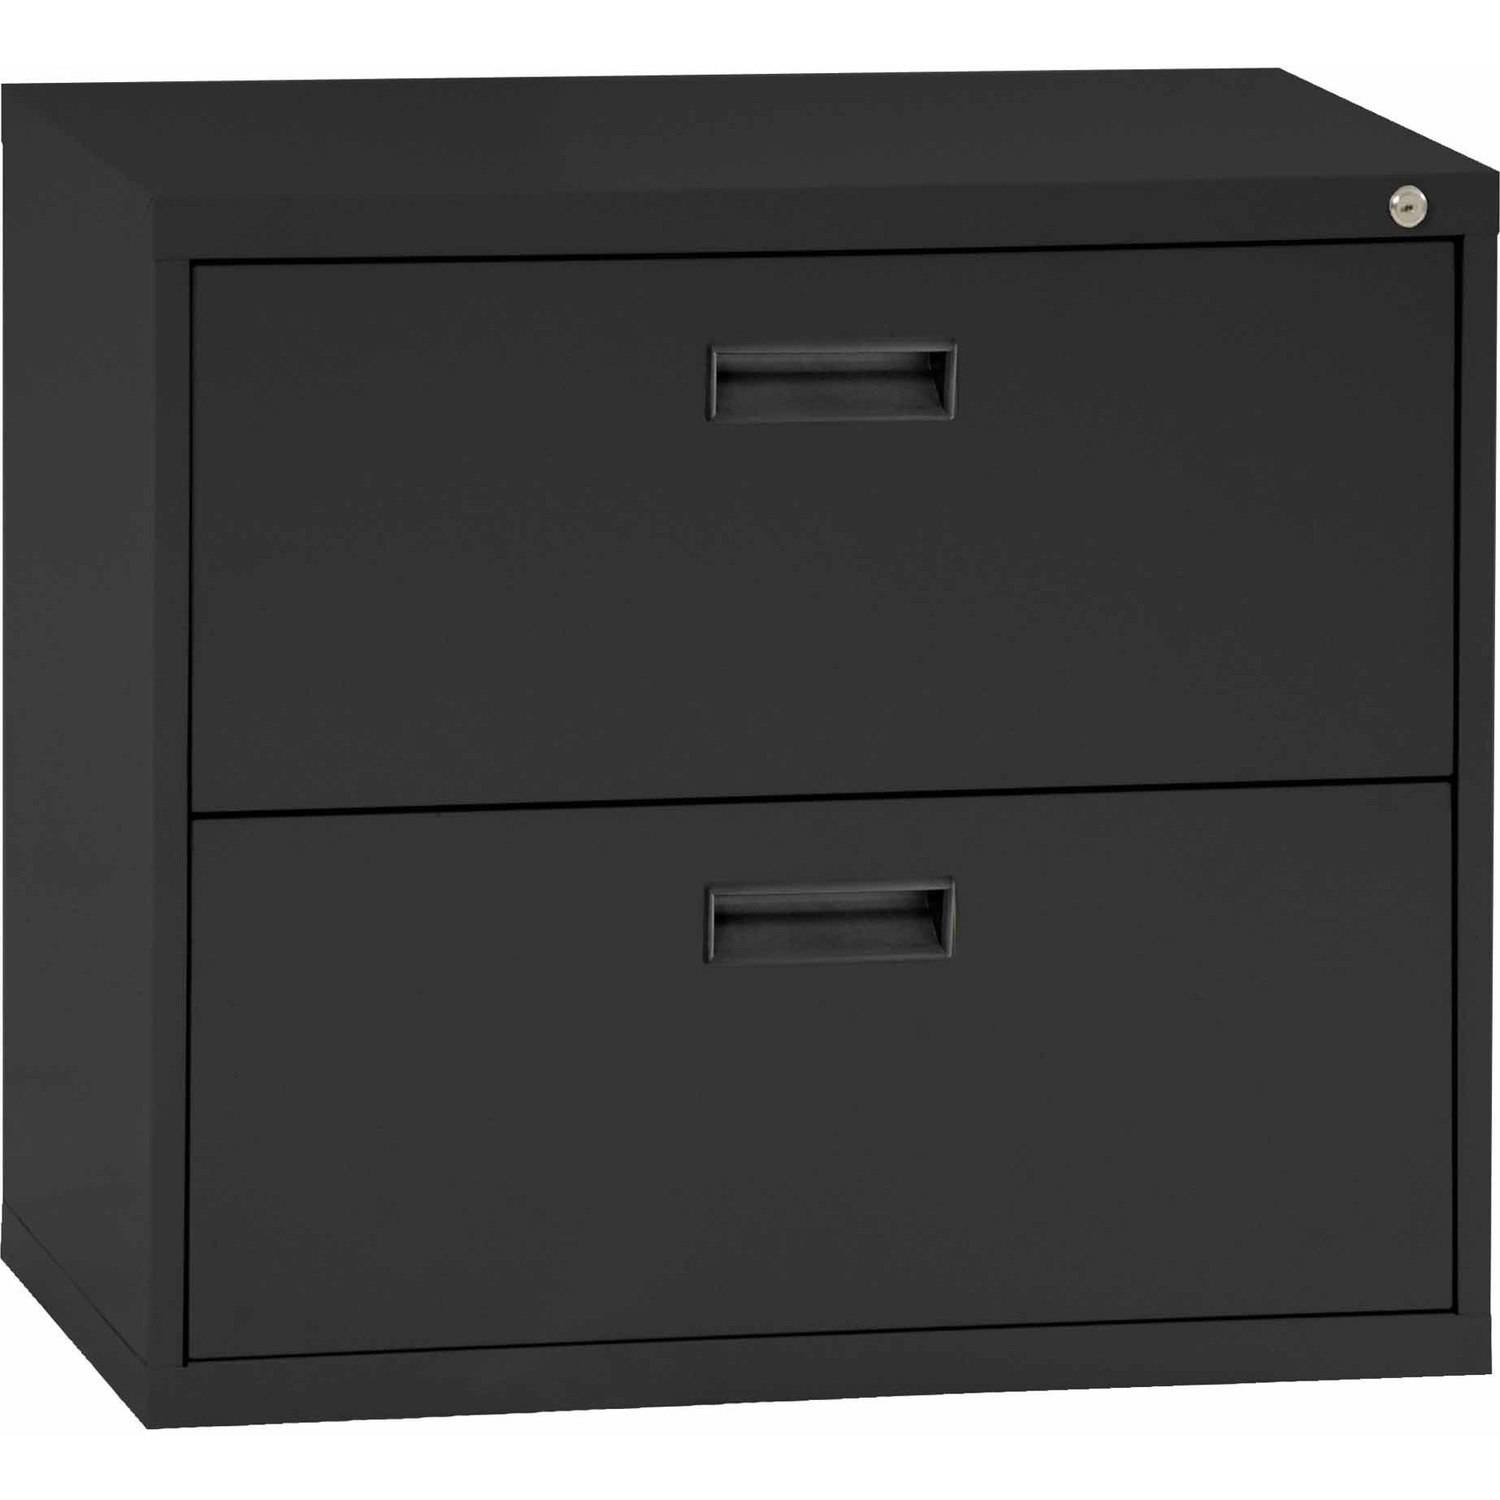 Sandusky Steel Lateral File Cabinet With Plastic Handle 2 Drawers E202l 09 in proportions 1500 X 1500